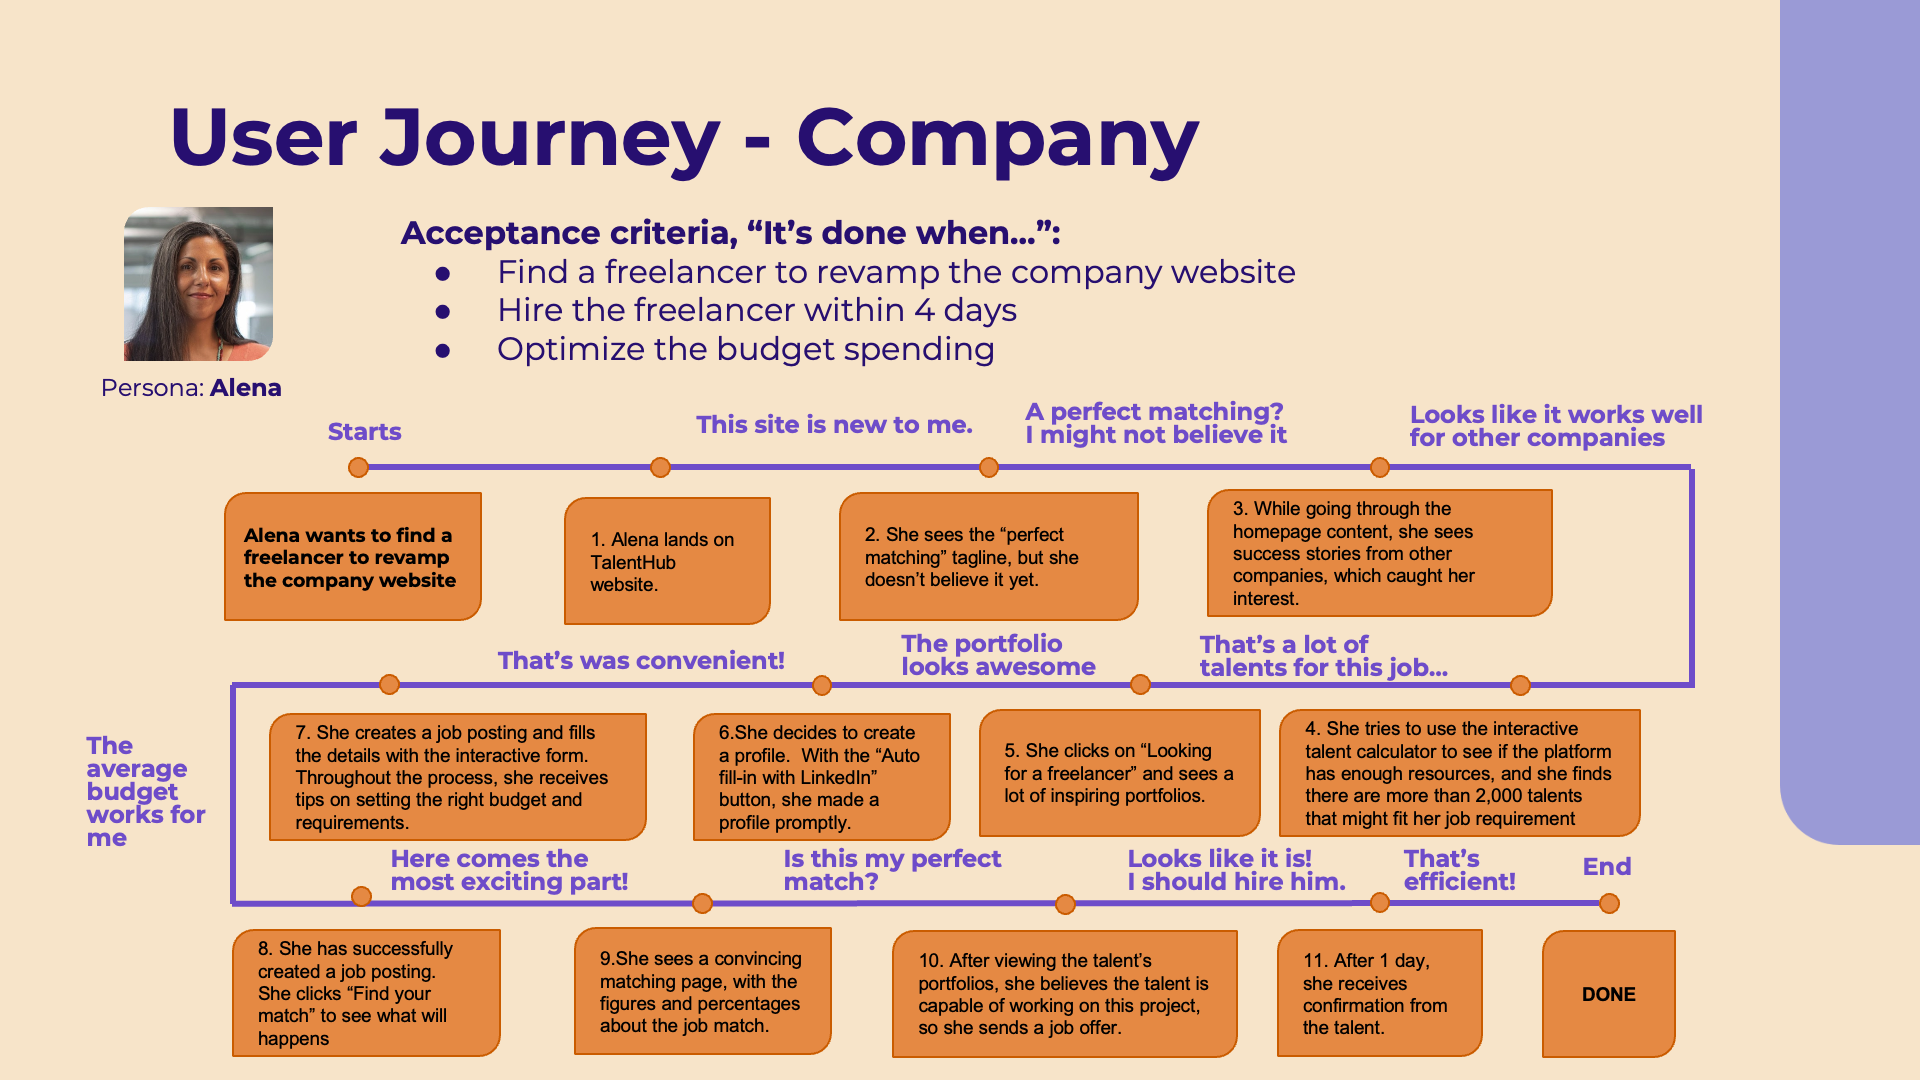 User Journey of a company